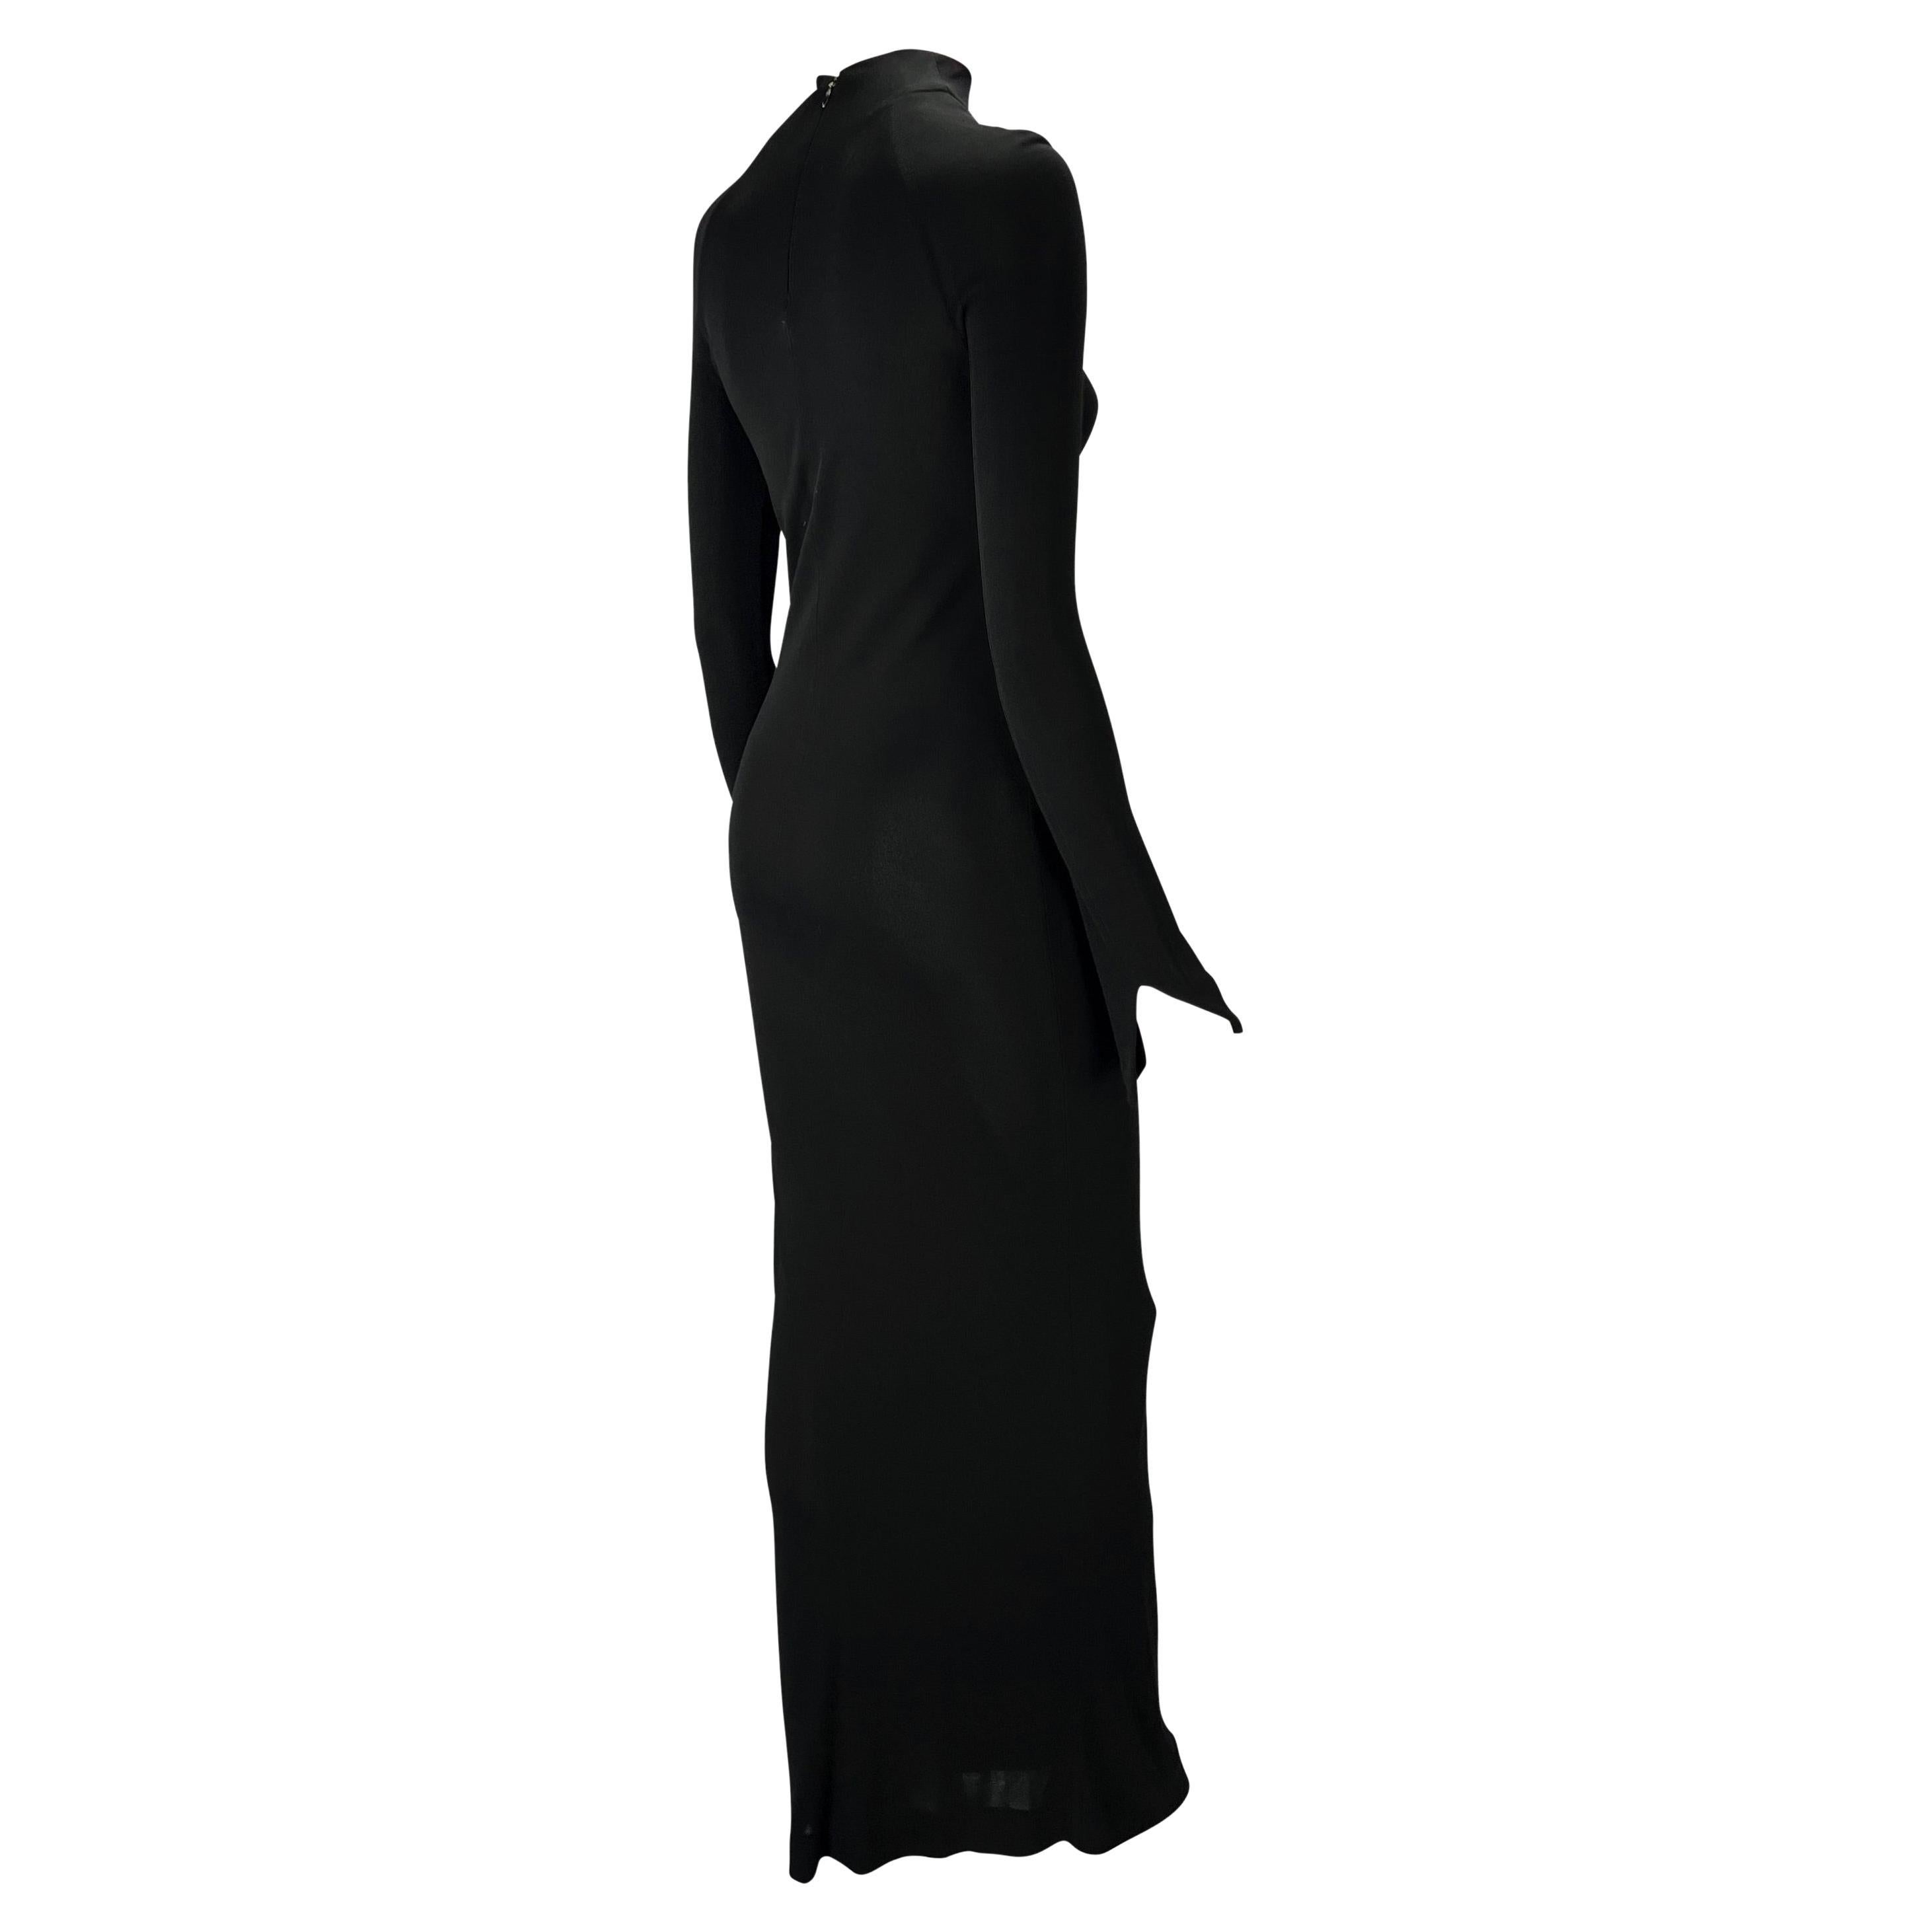 S/S 1998 Gucci by Tom Ford Black Stretch Viscose Long Sleeve Gown For Sale 4